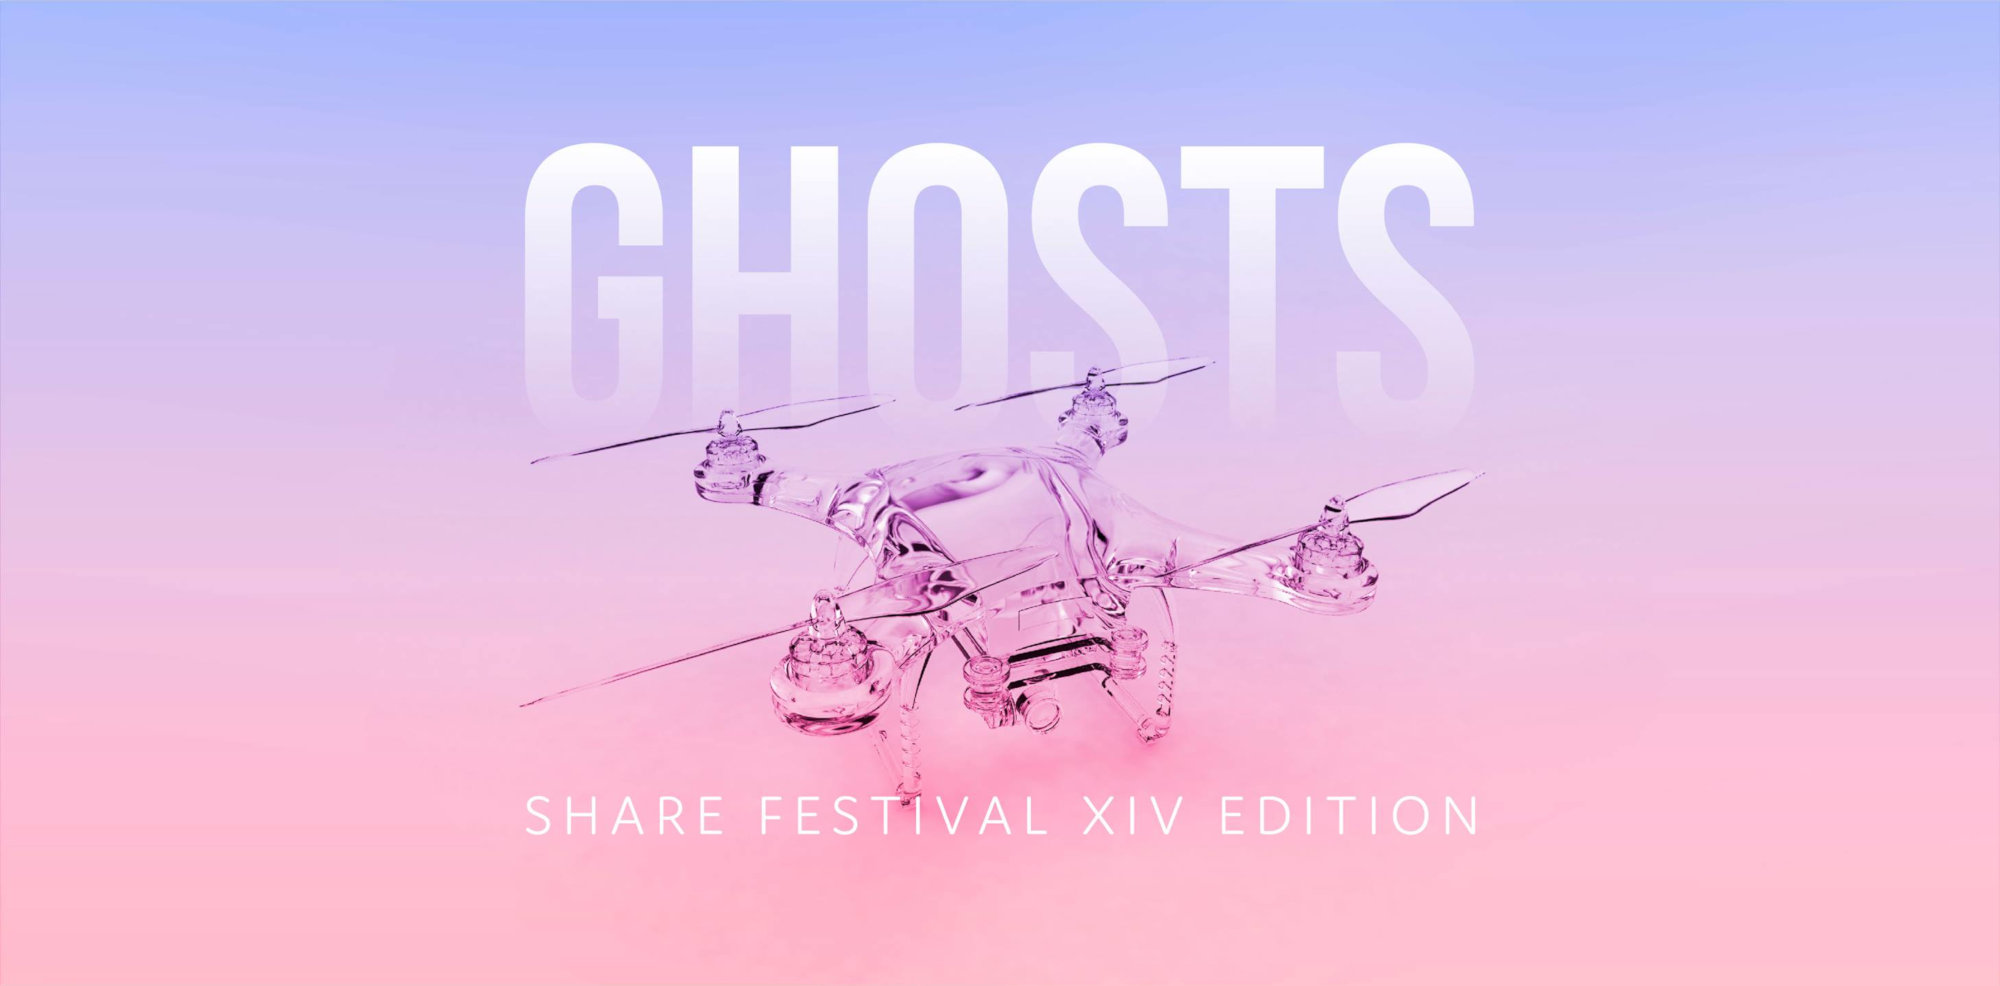 Share Prize - Ghosts